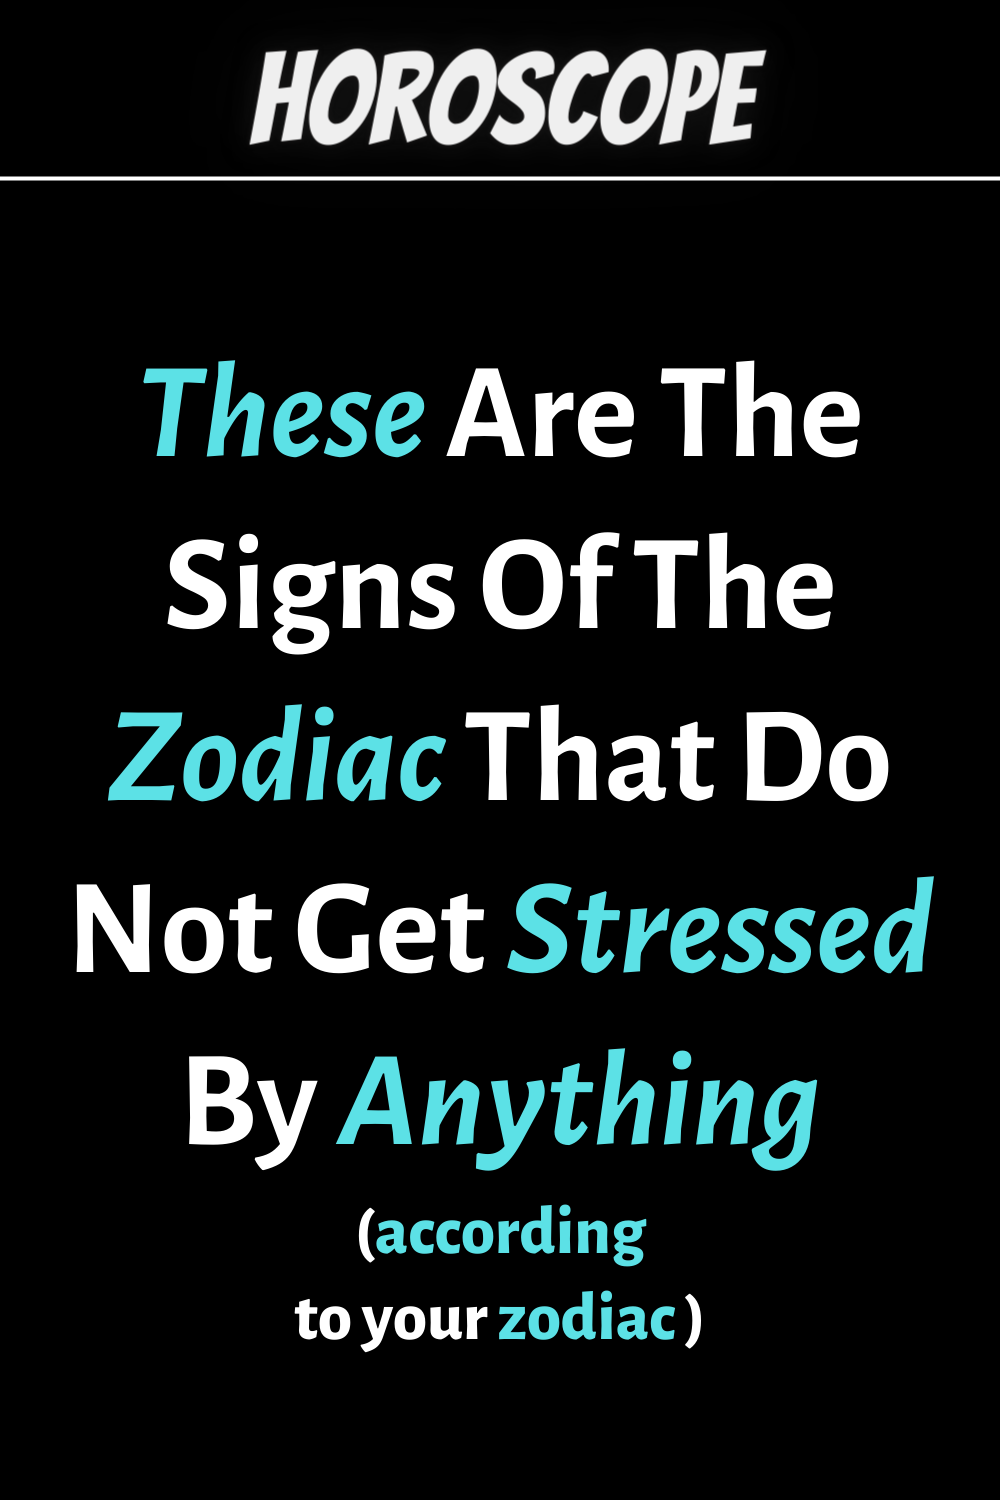 These Are The Signs Of The Zodiac That Do Not Get Stressed By Anything